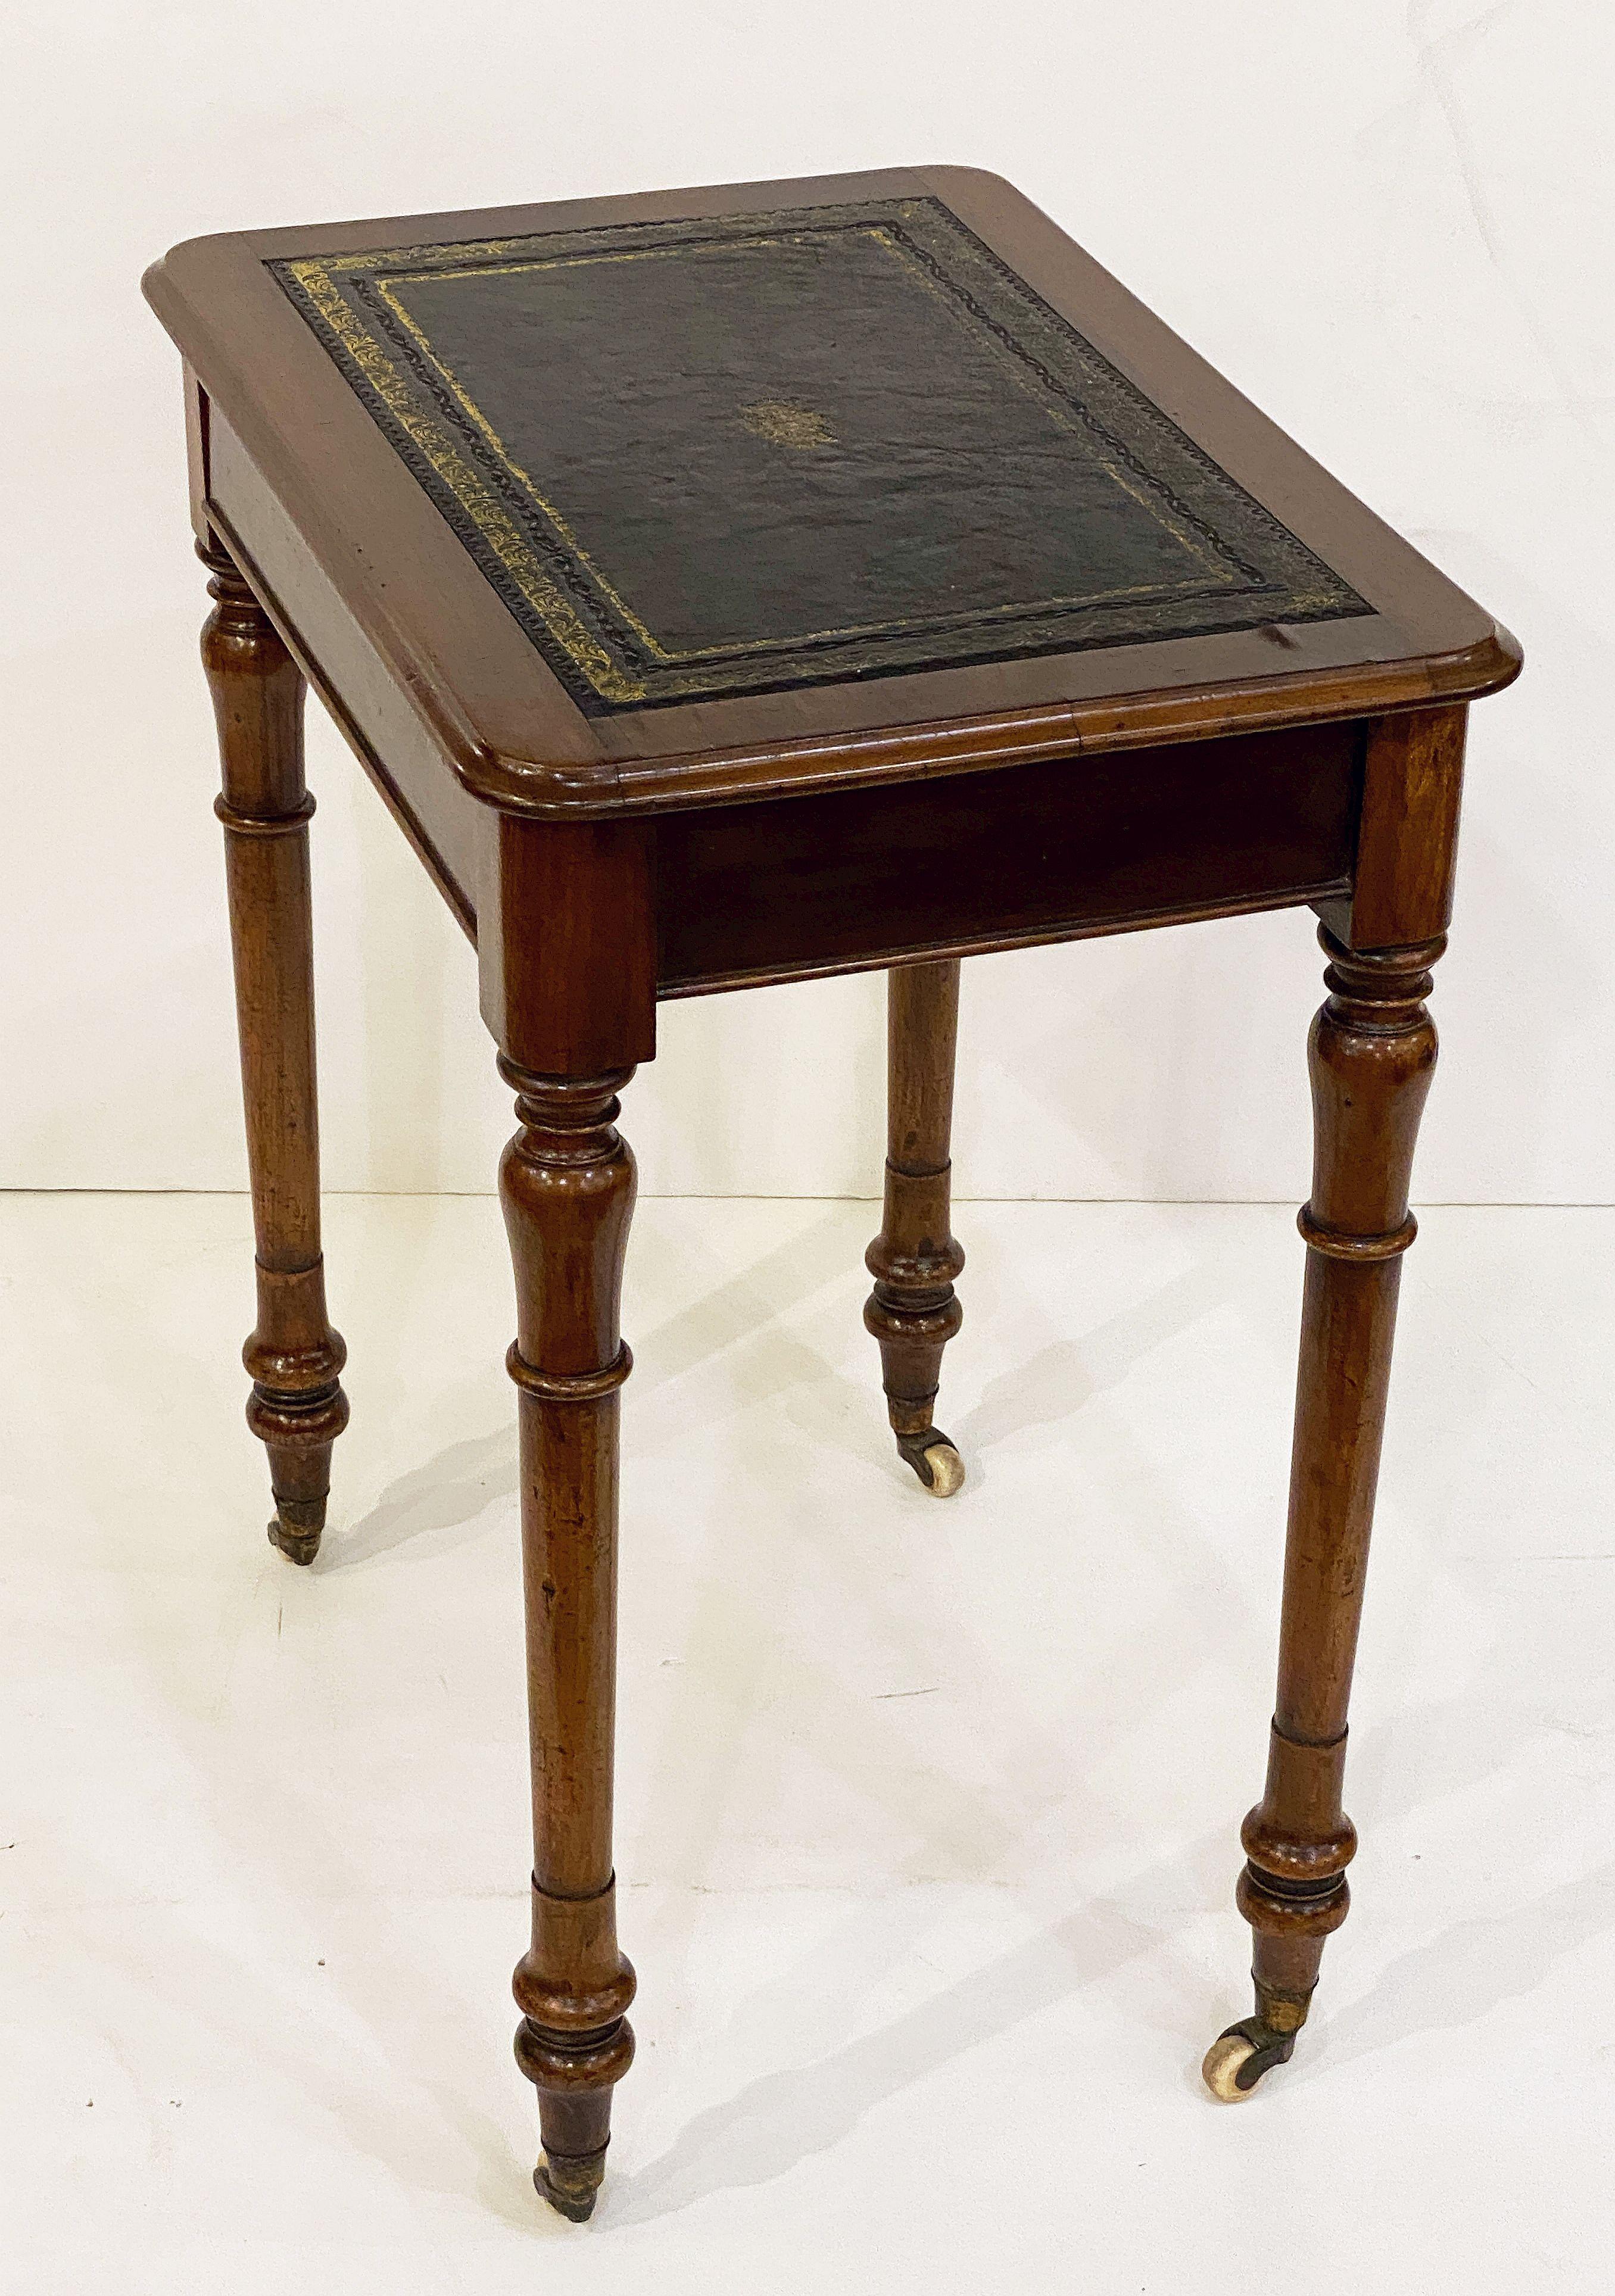 A fine English writing table or desk of mahogany, featuring a rectangular moulded mahogany and gilt embossed black leather inset top over a frieze of one drawer, and set upon four turned legs with original rolling casters.